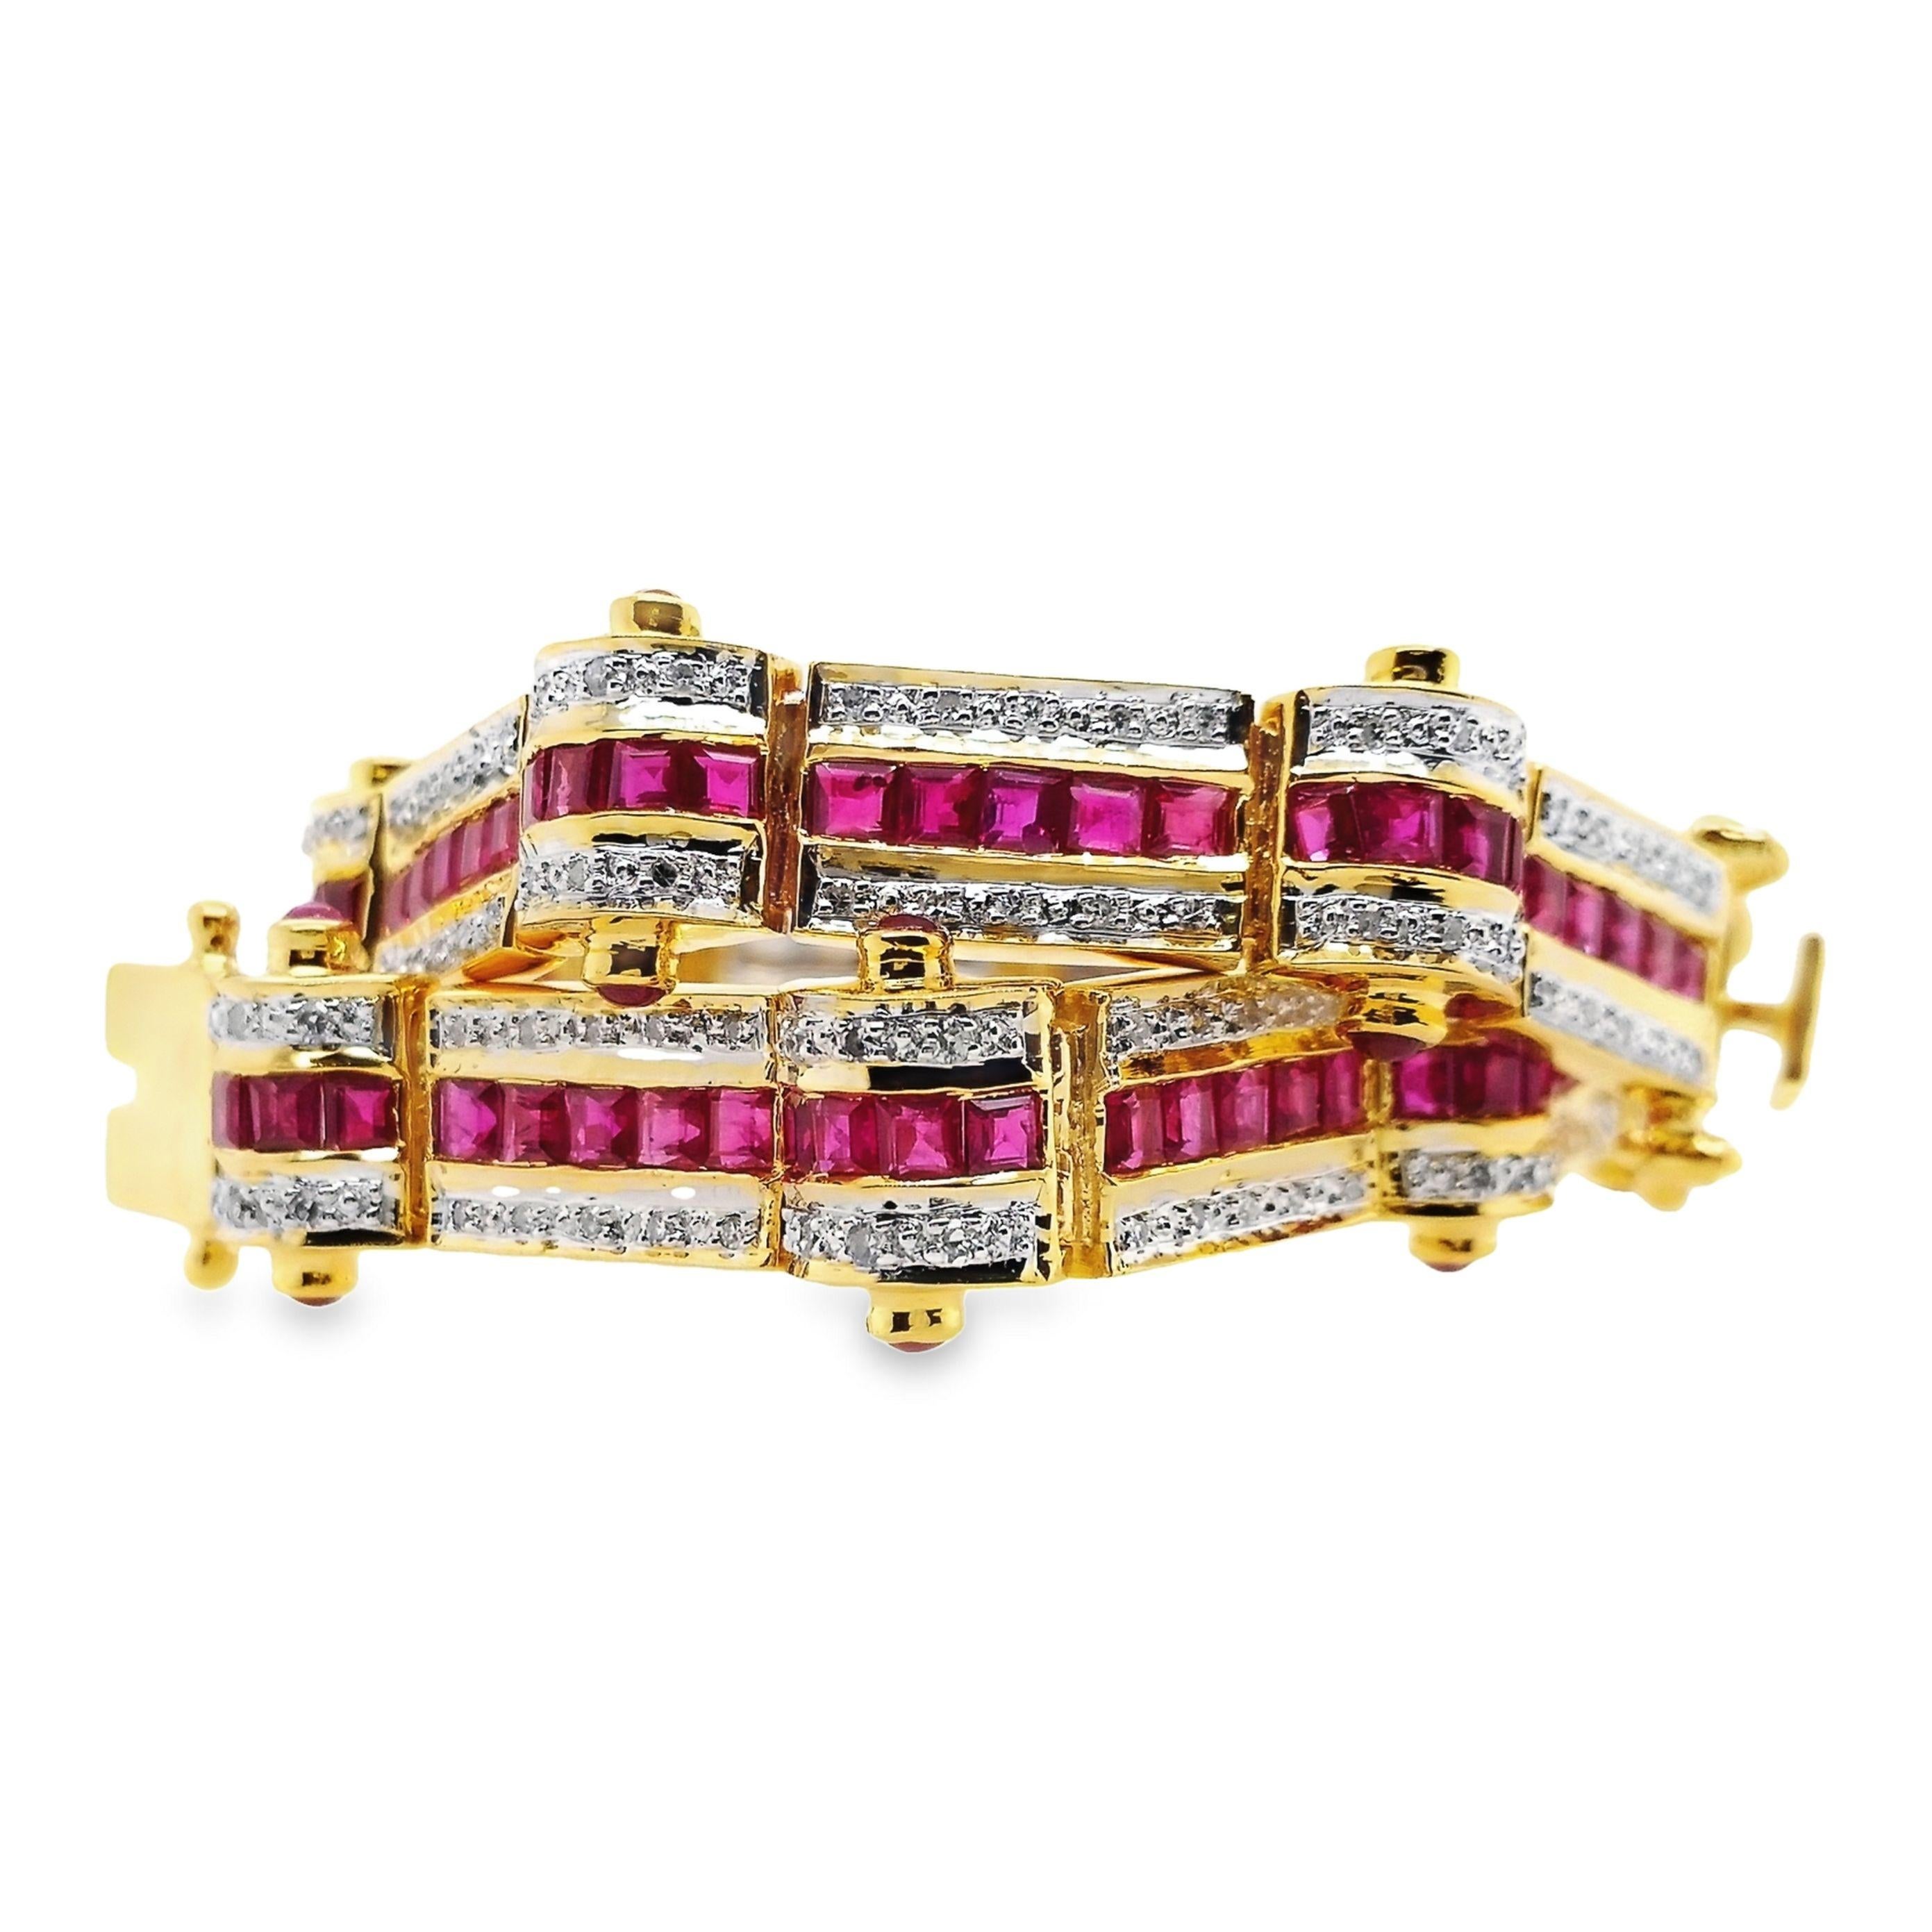 Cabochon IGI Certified 8.70ct Natural Rubies and 0.72ct Diamonds Set in Gold Bracelet For Sale